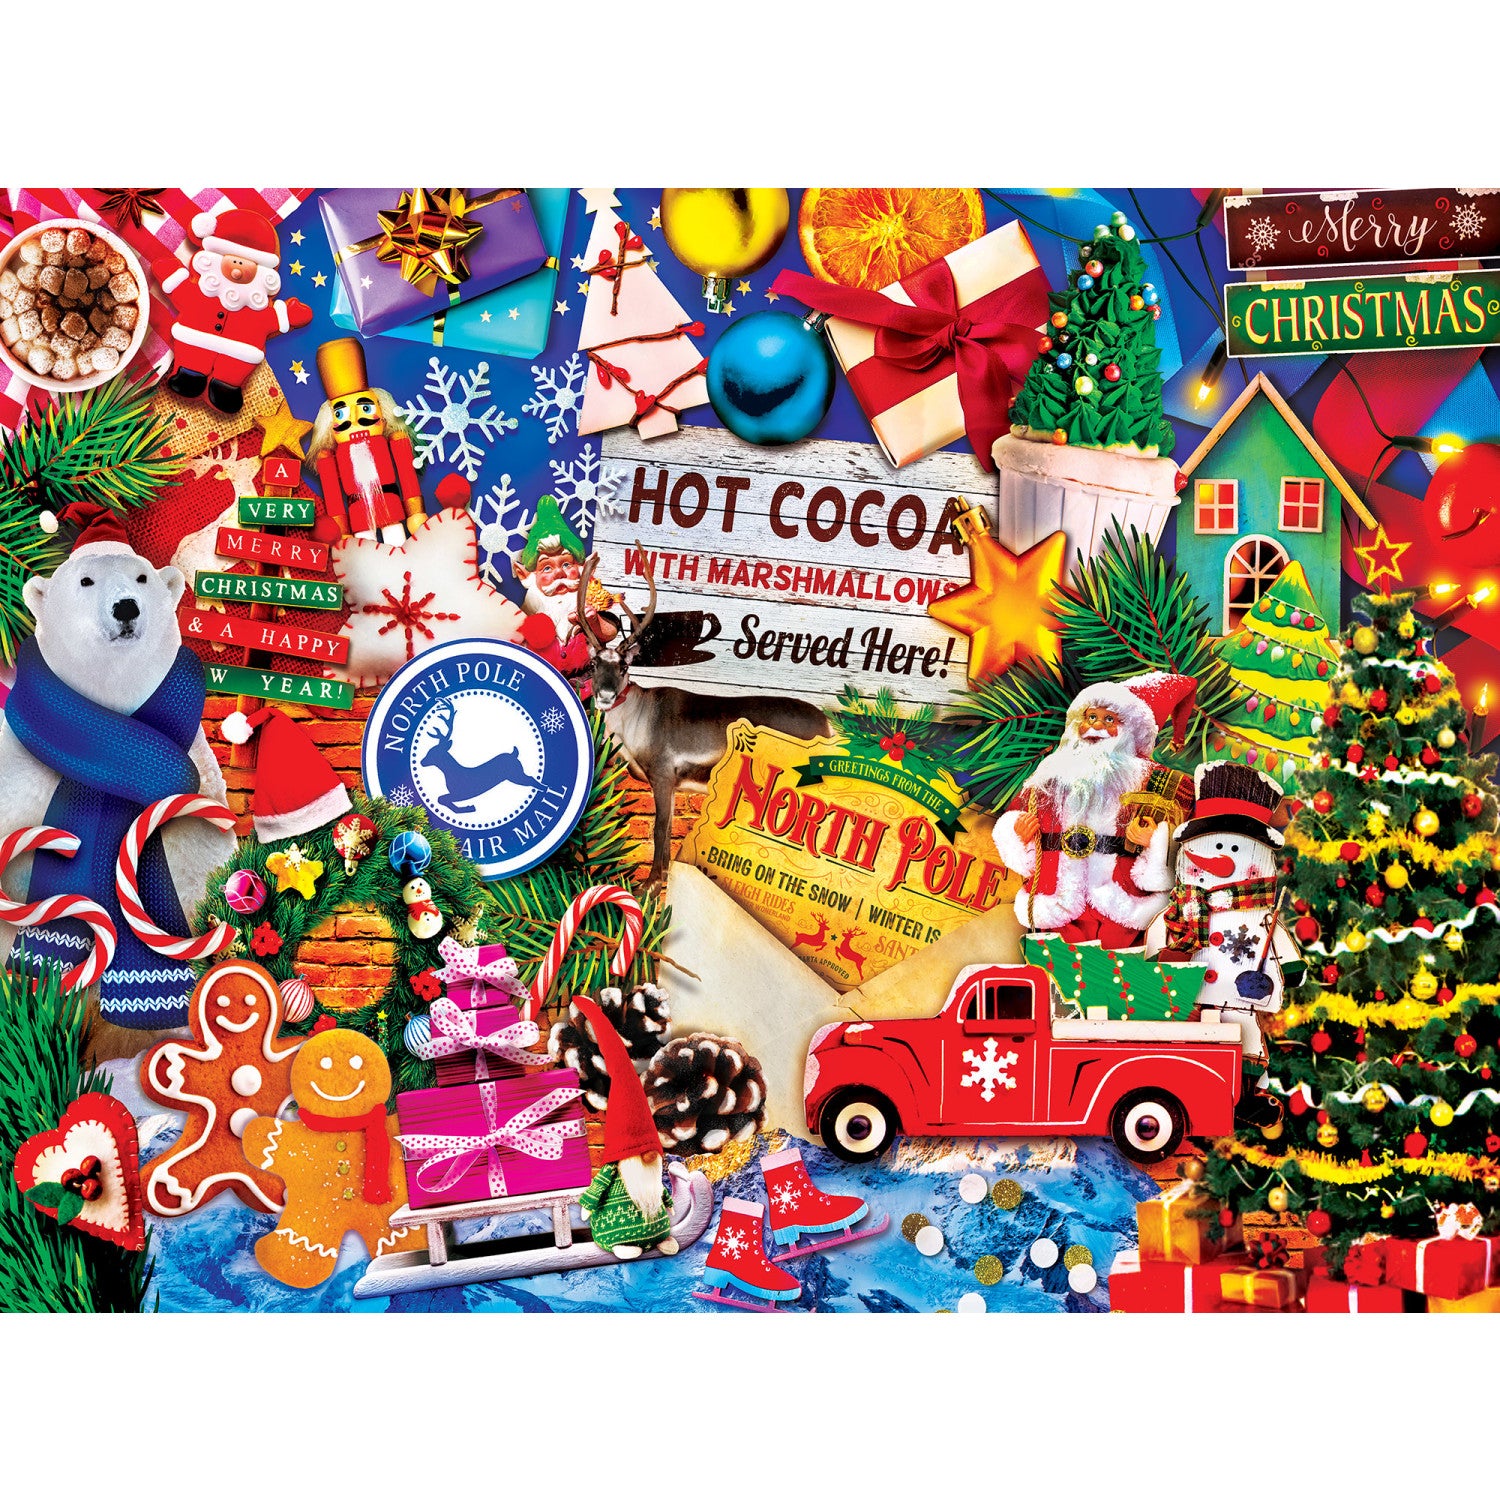 Greetings From - The North Pole 550 Piece Holiday Puzzle